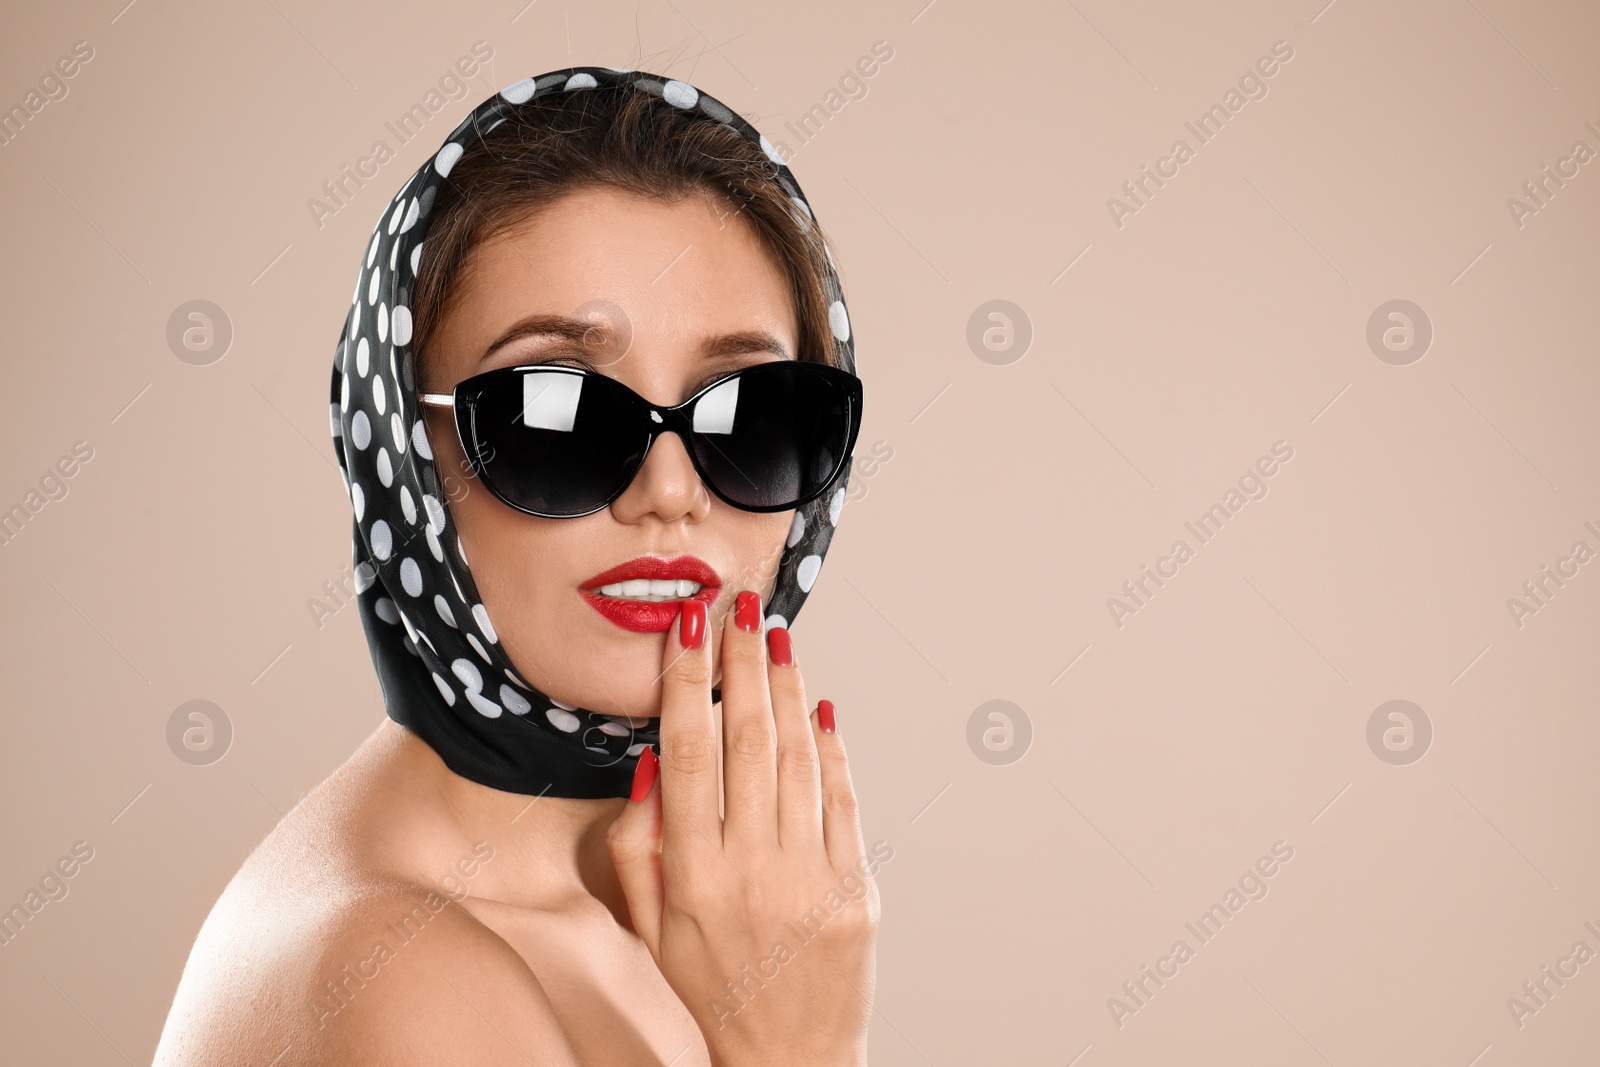 Photo of Young woman wearing stylish sunglasses and headscarf on beige background. Space for text